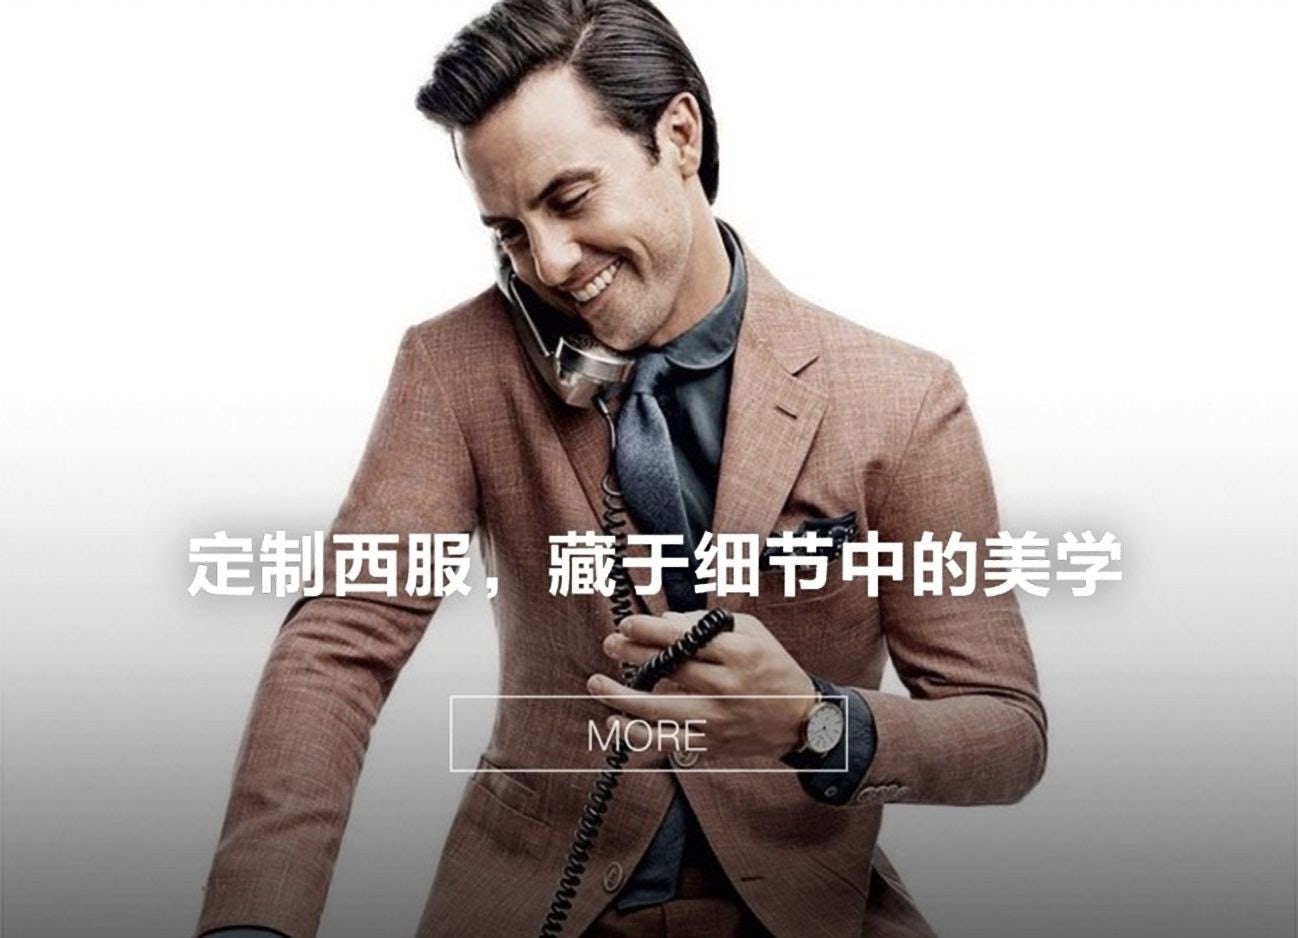 The 9 Best WeChat Campaigns by Luxury Brands in April 2018